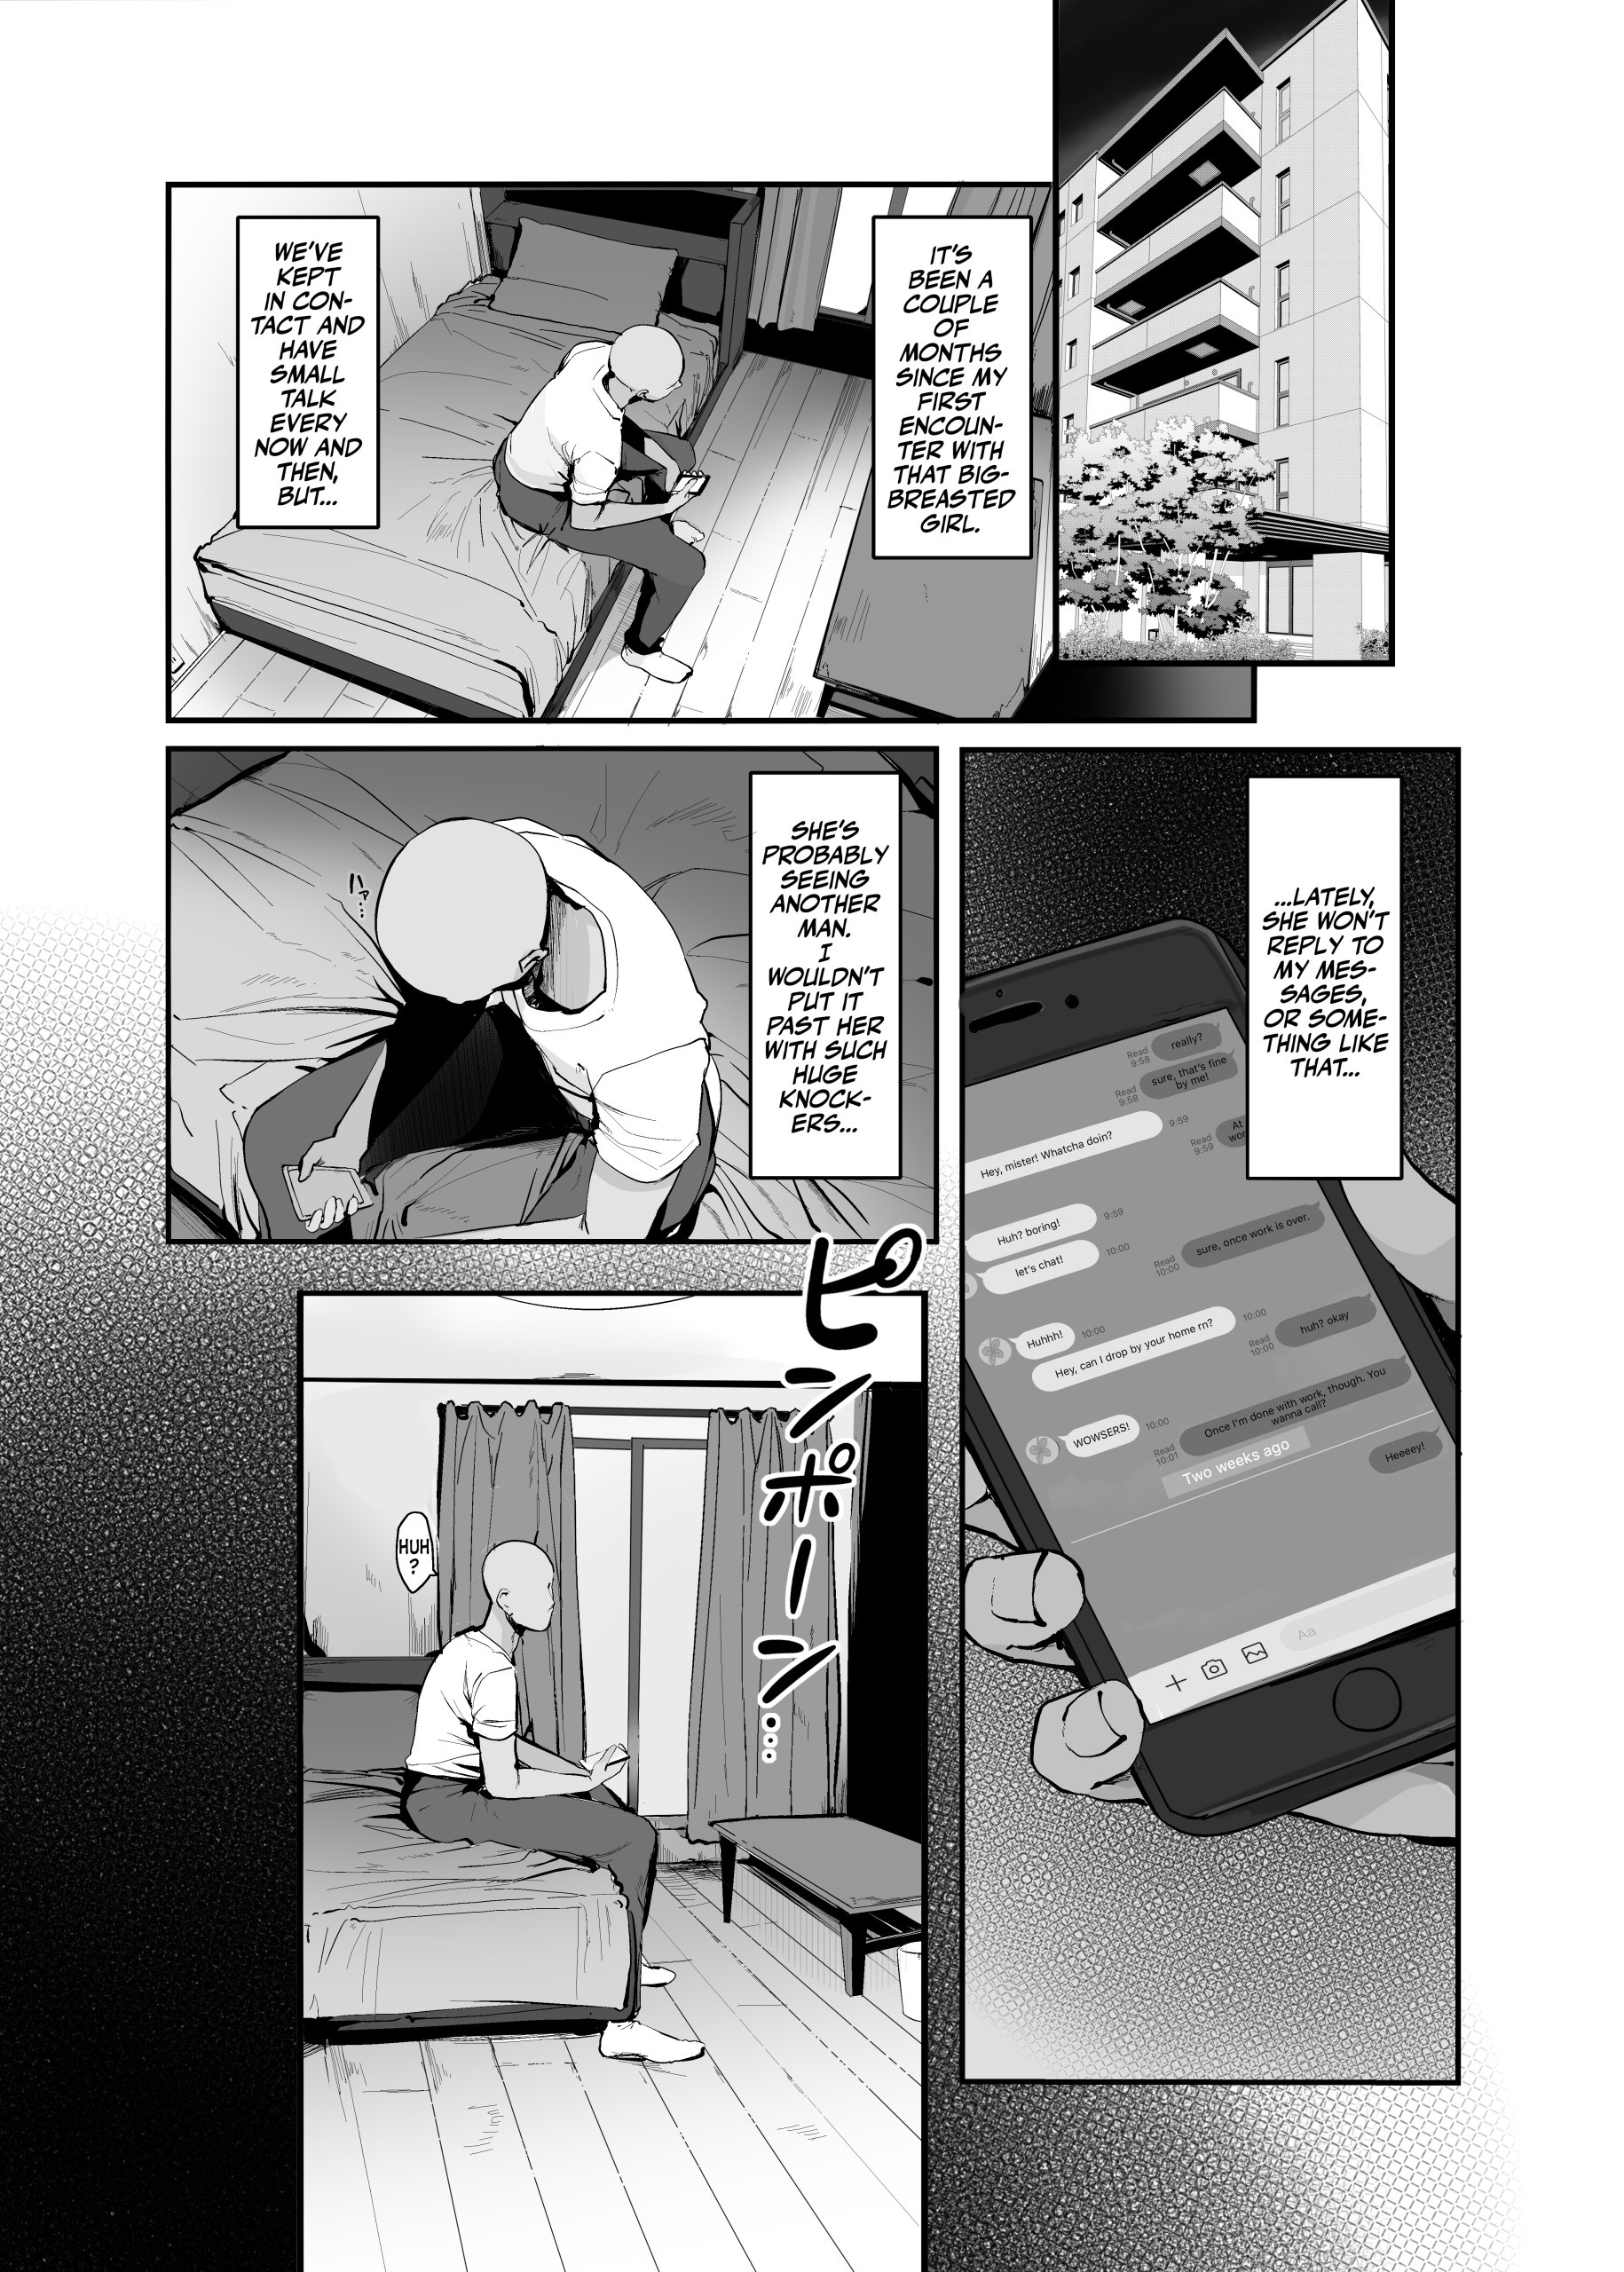 Can I Stay Over, Mister hentai manga picture 2